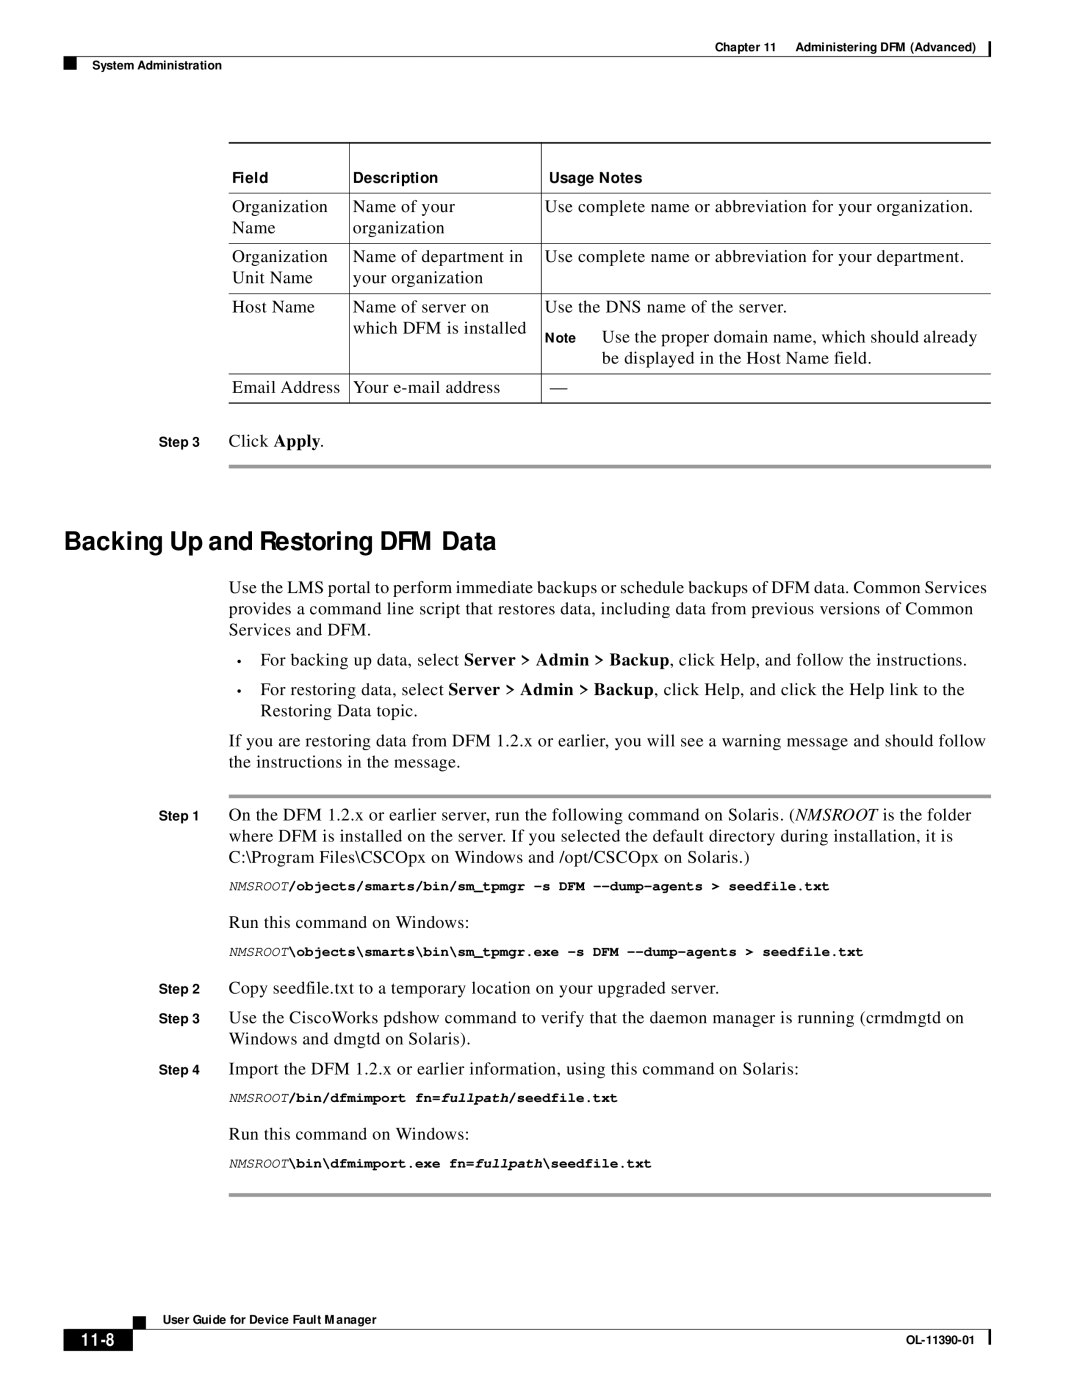 Cisco Systems OL-11390-01 manual Backing Up and Restoring DFM Data, 11-8, Field, Description, Usage Notes 